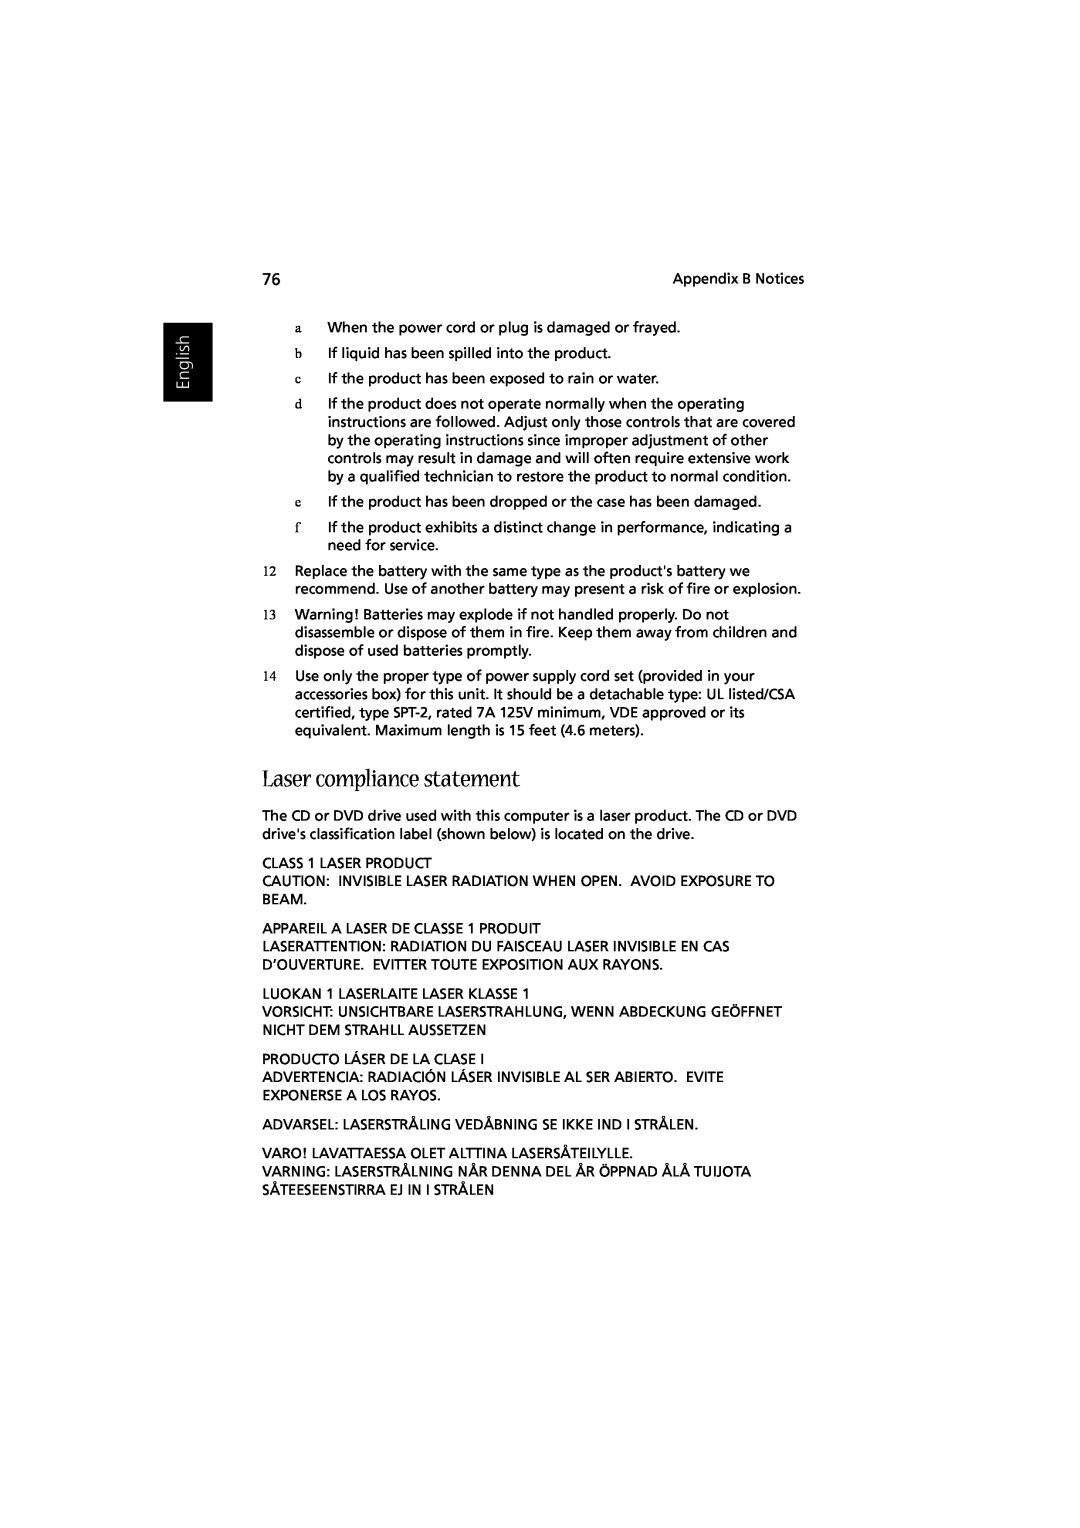 Acer Aspire 1350 manual Laser compliance statement, English 